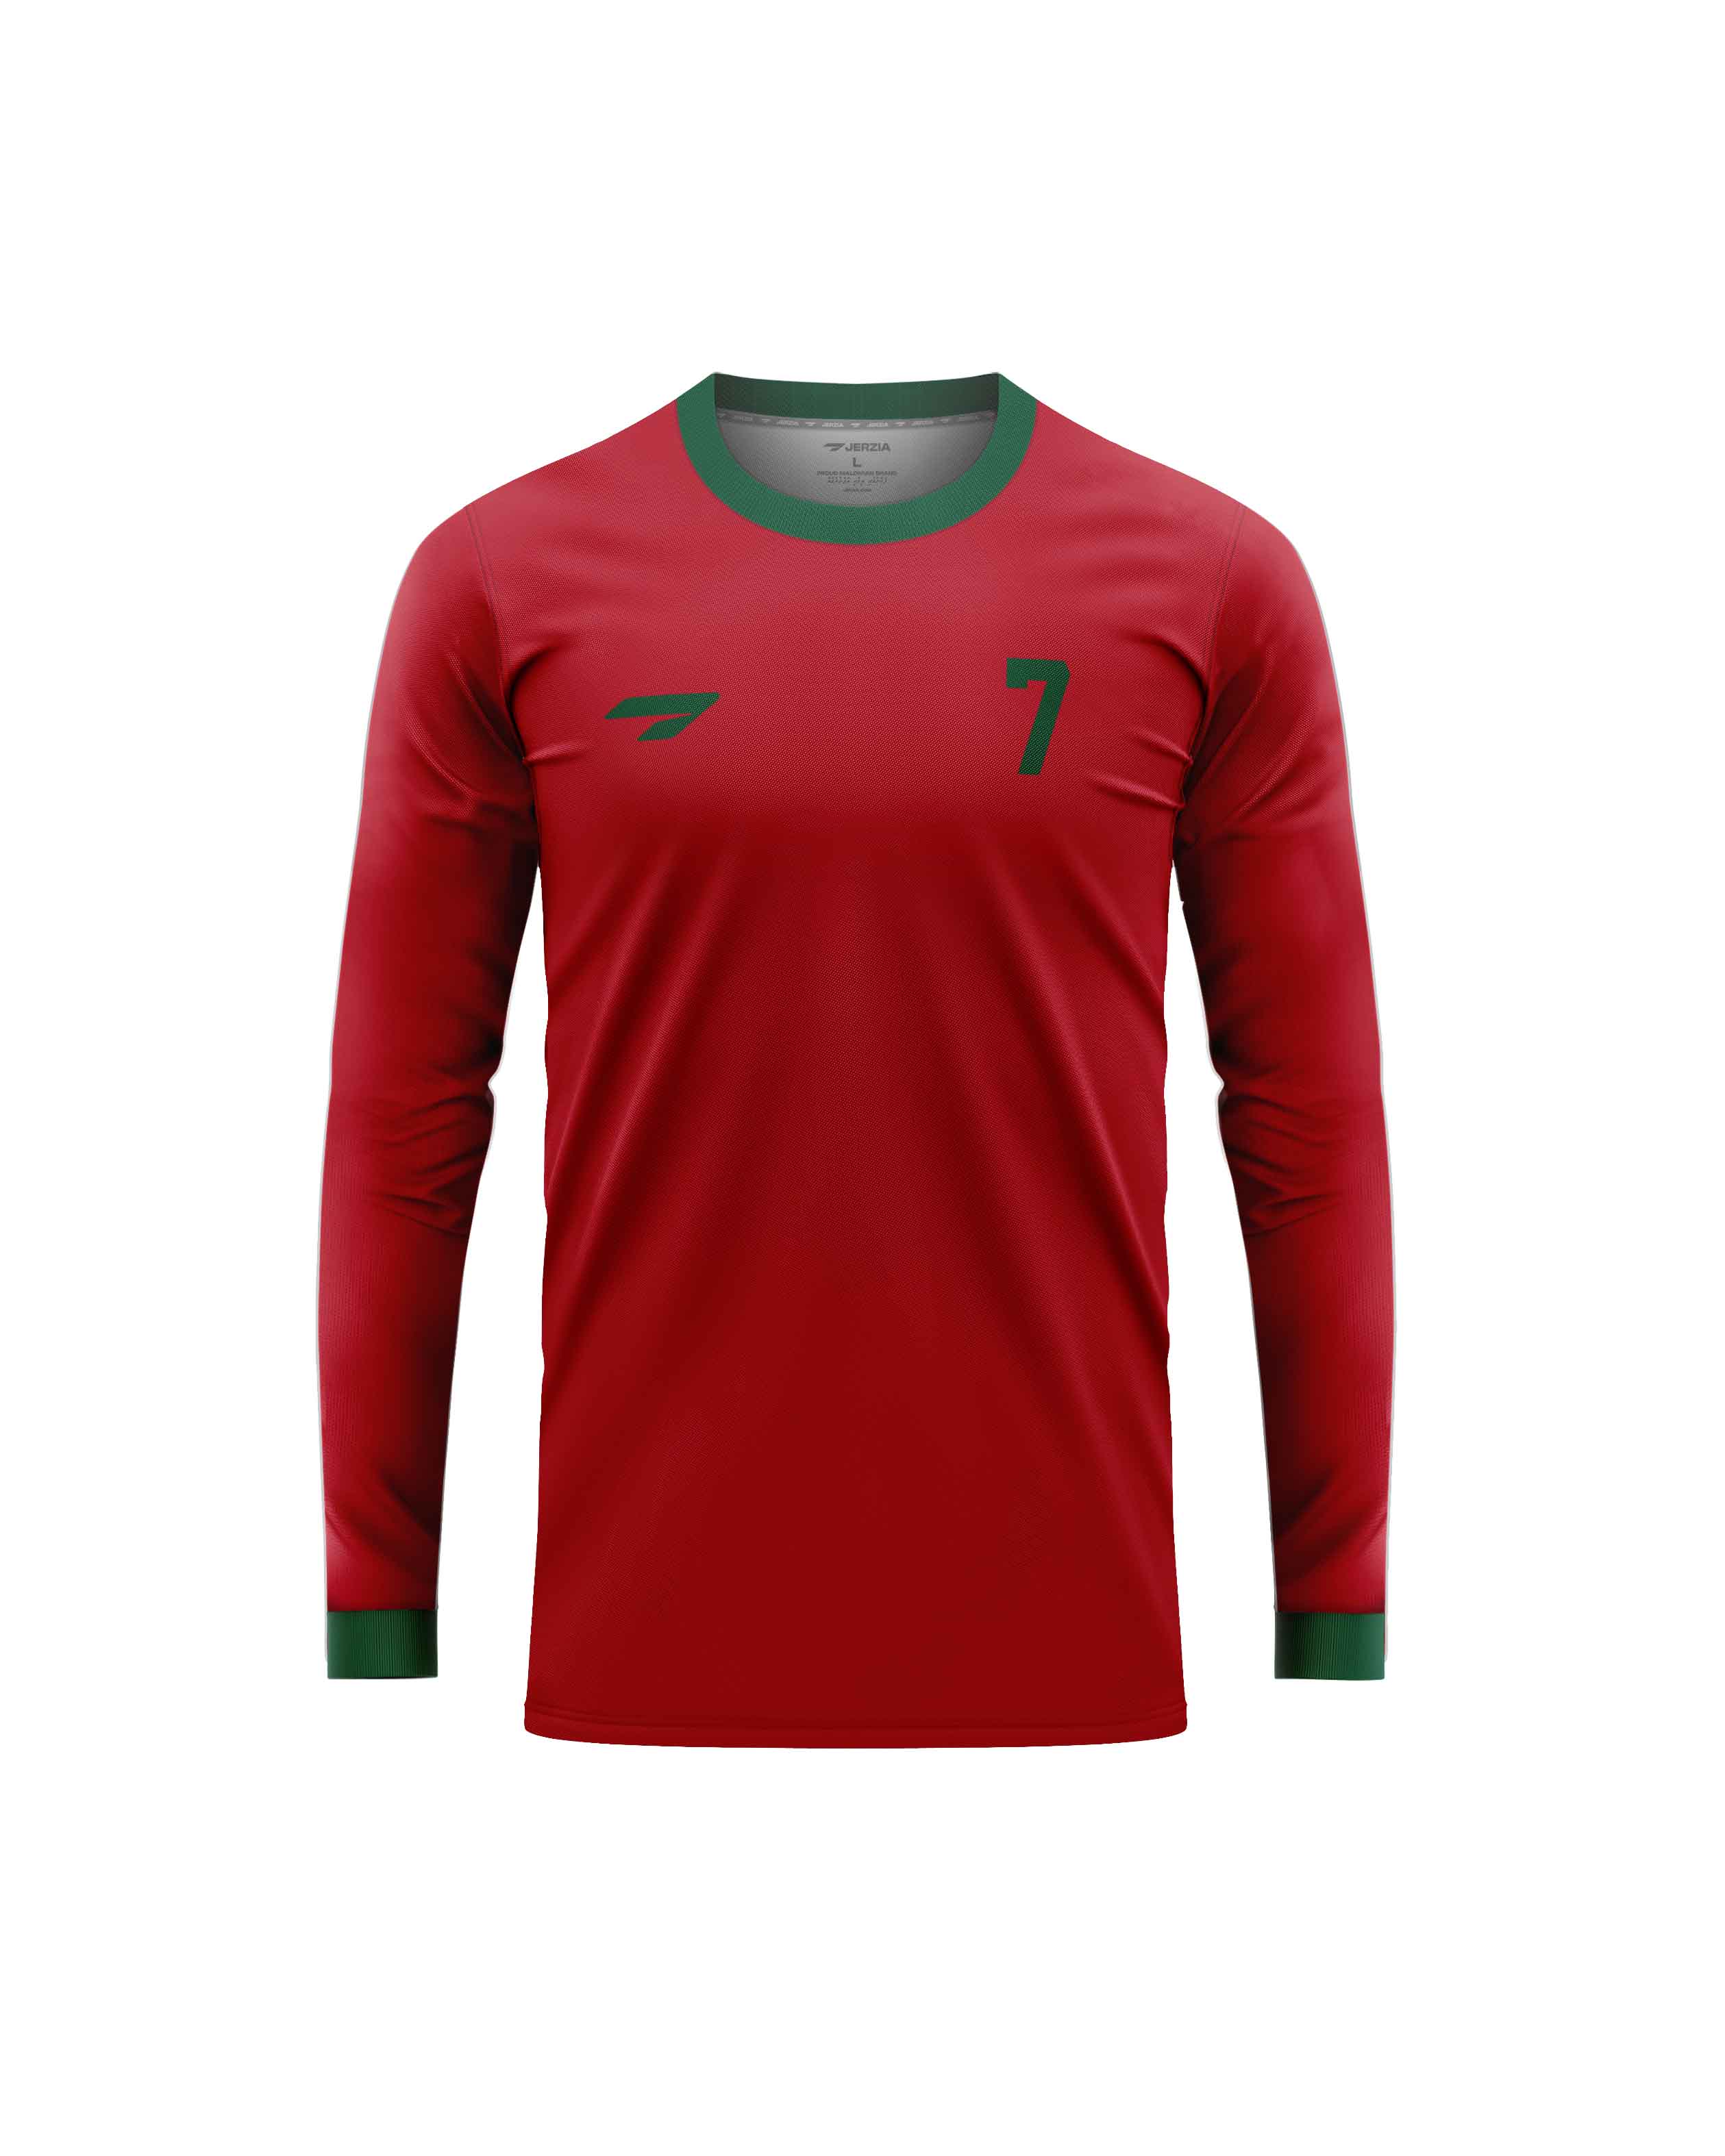 GOAT 7 Portugal LS Jersey